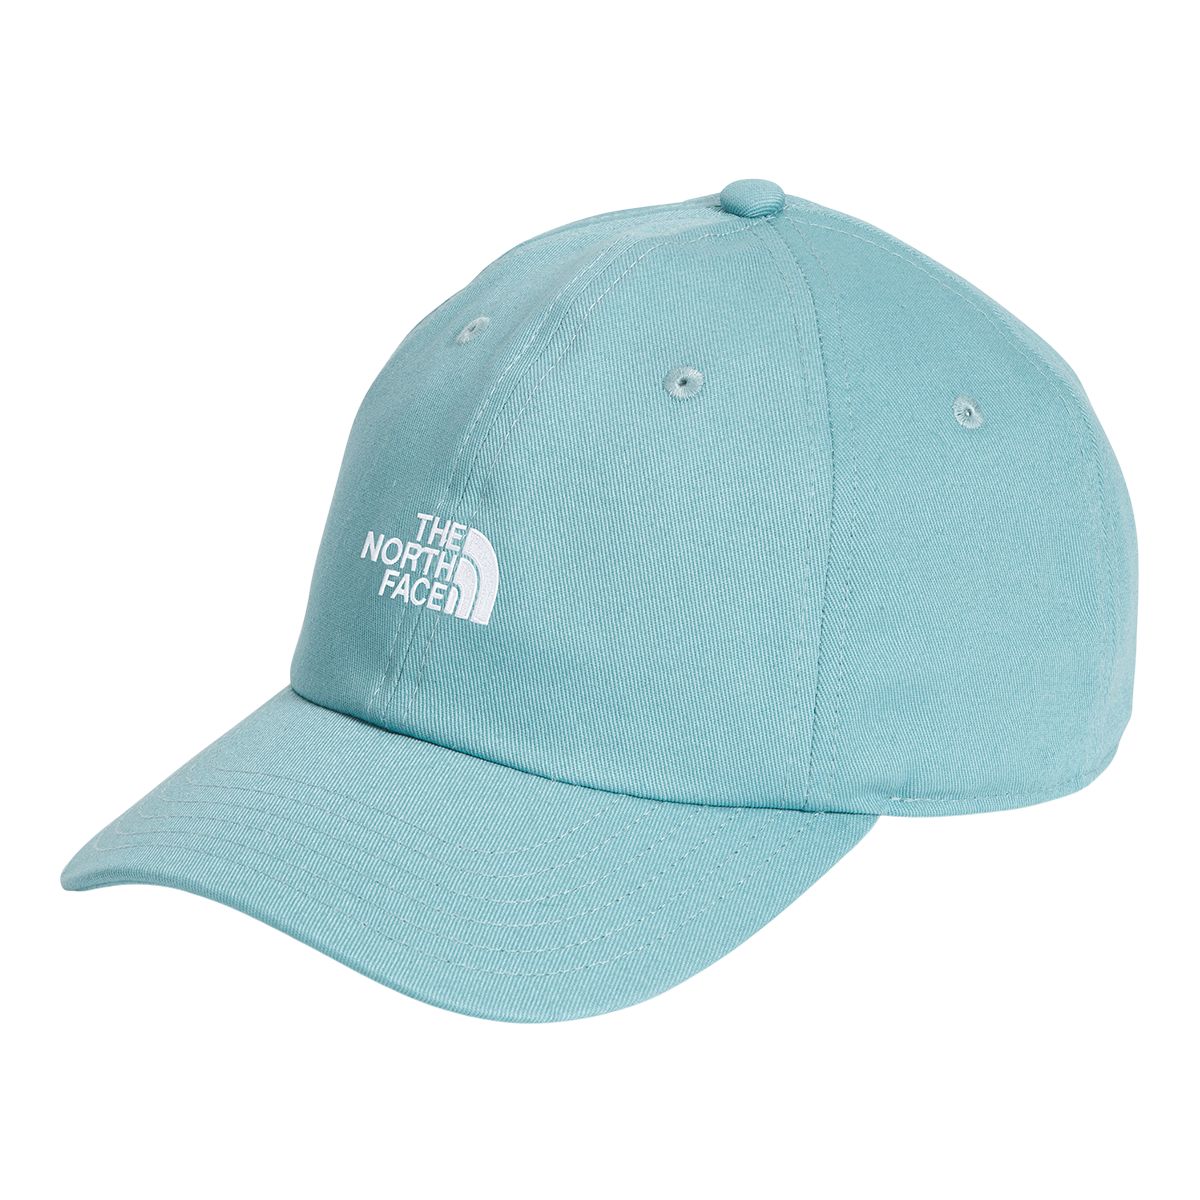 The North Face Women's Backyard Ball Adjustable Cap | Atmosphere